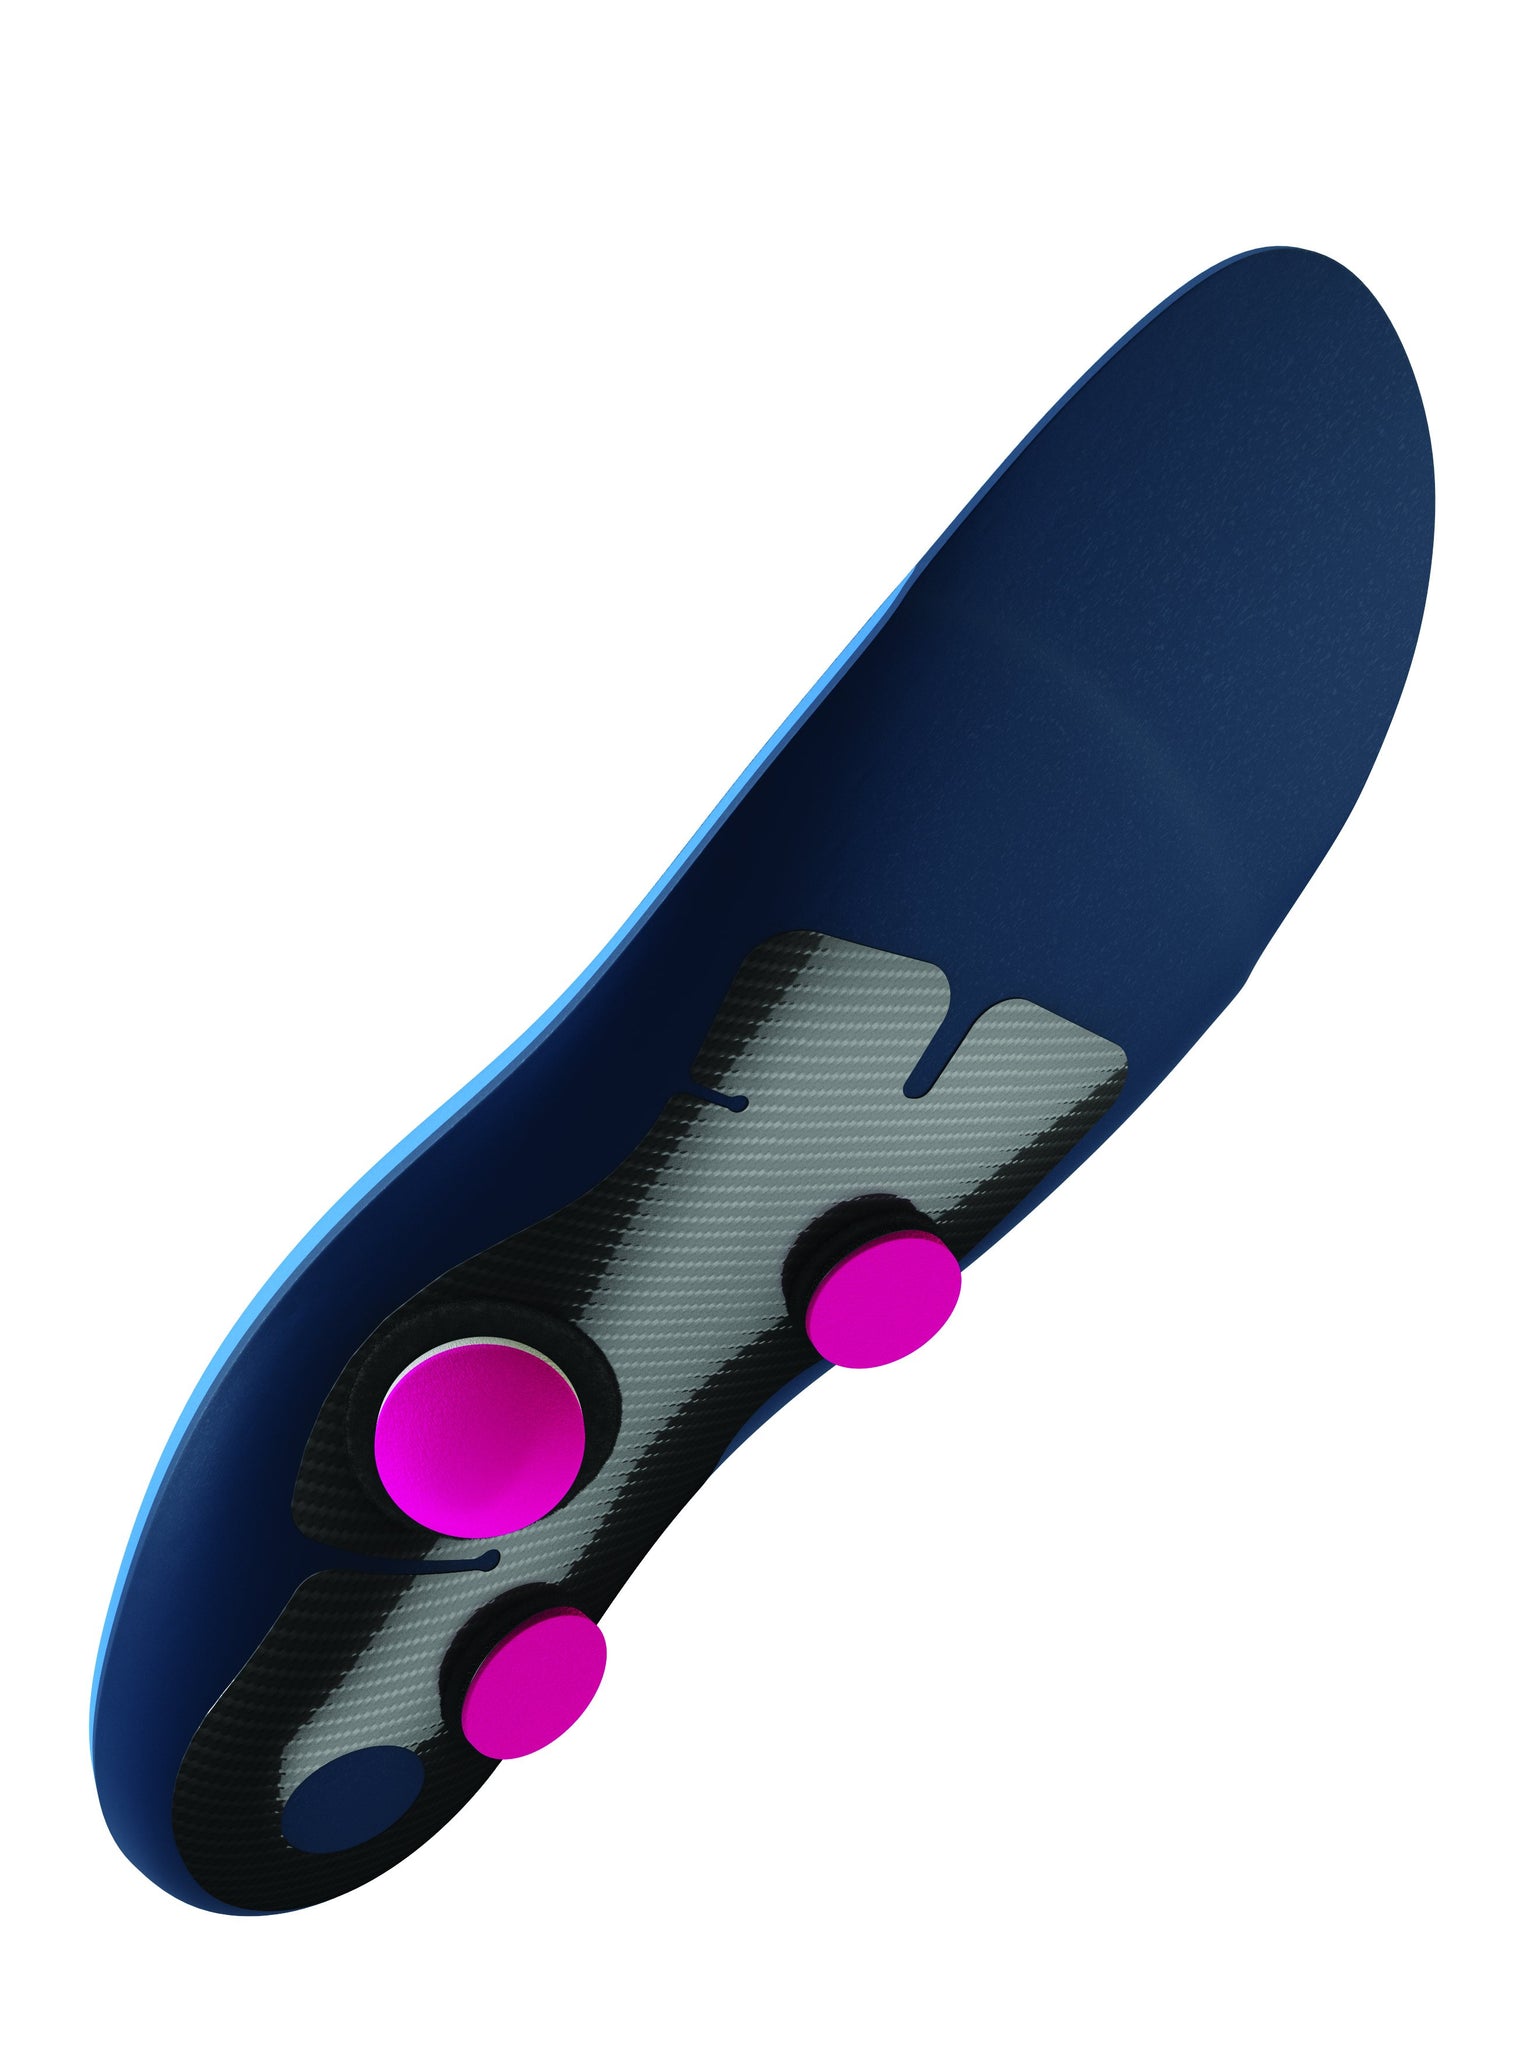 igli Heelspur Light carbon orthotic insole - CLOSEOUT